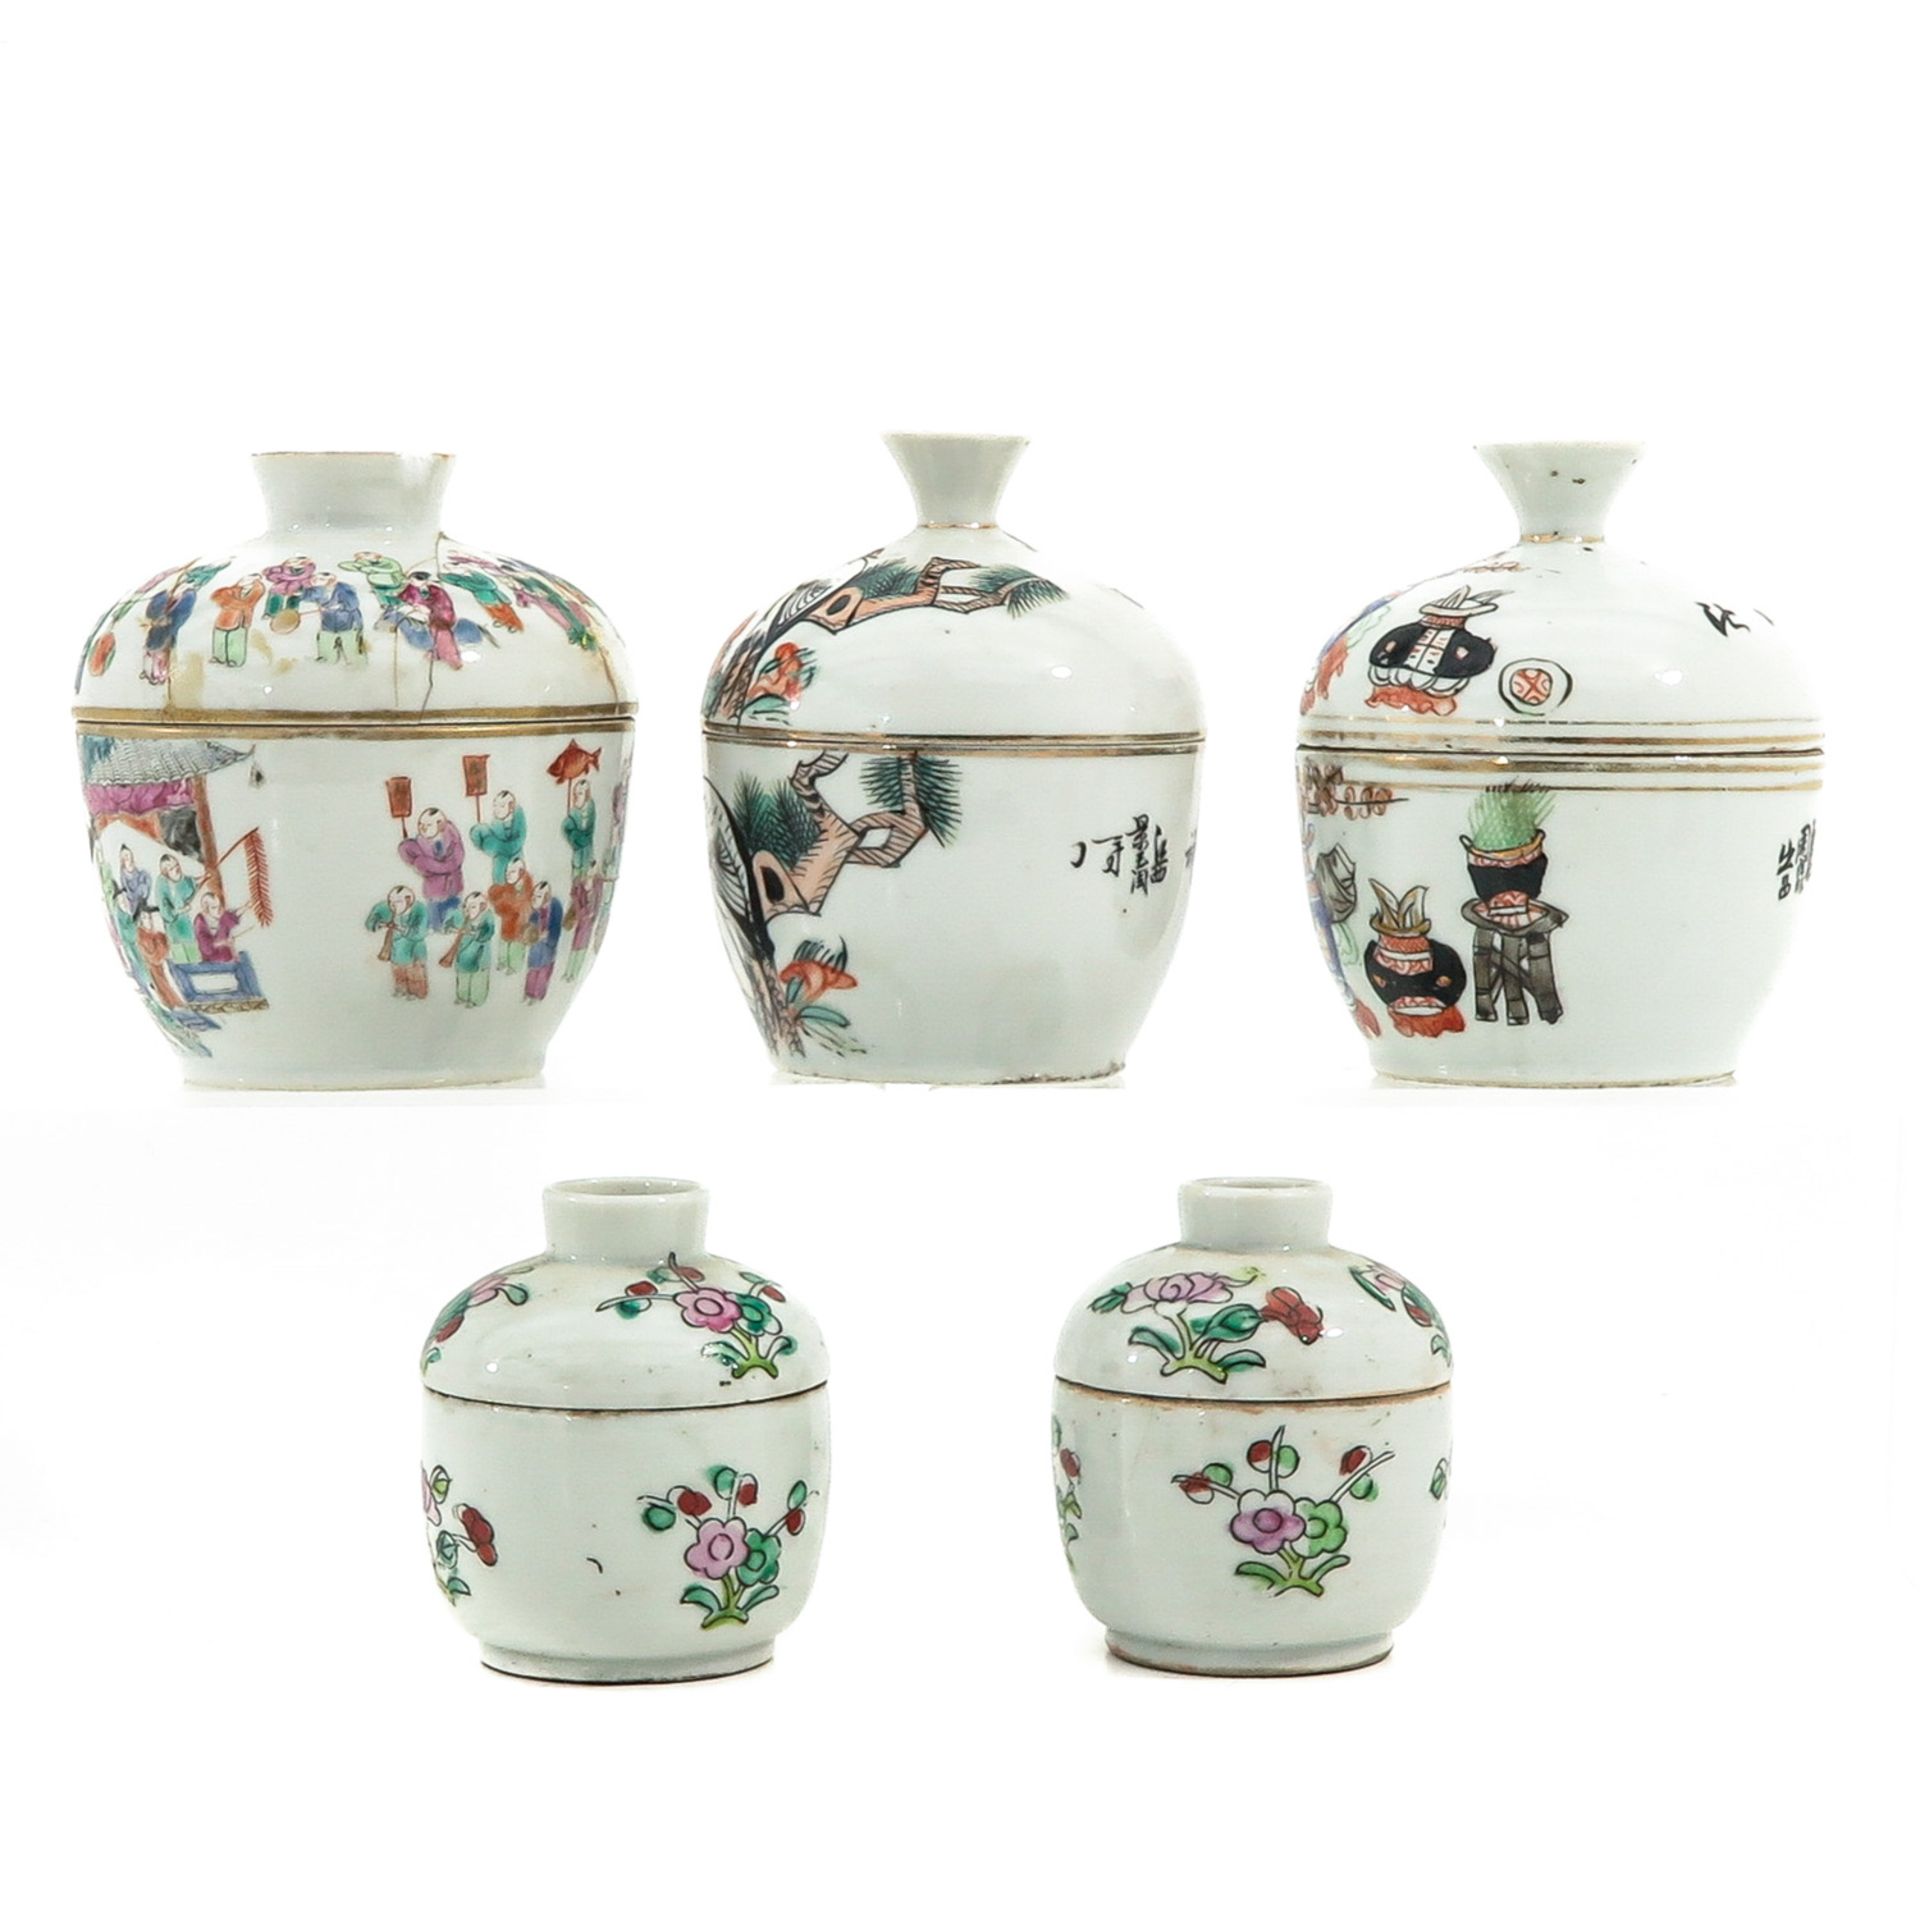 A Collection of 5 Jars with Covers - Image 2 of 10